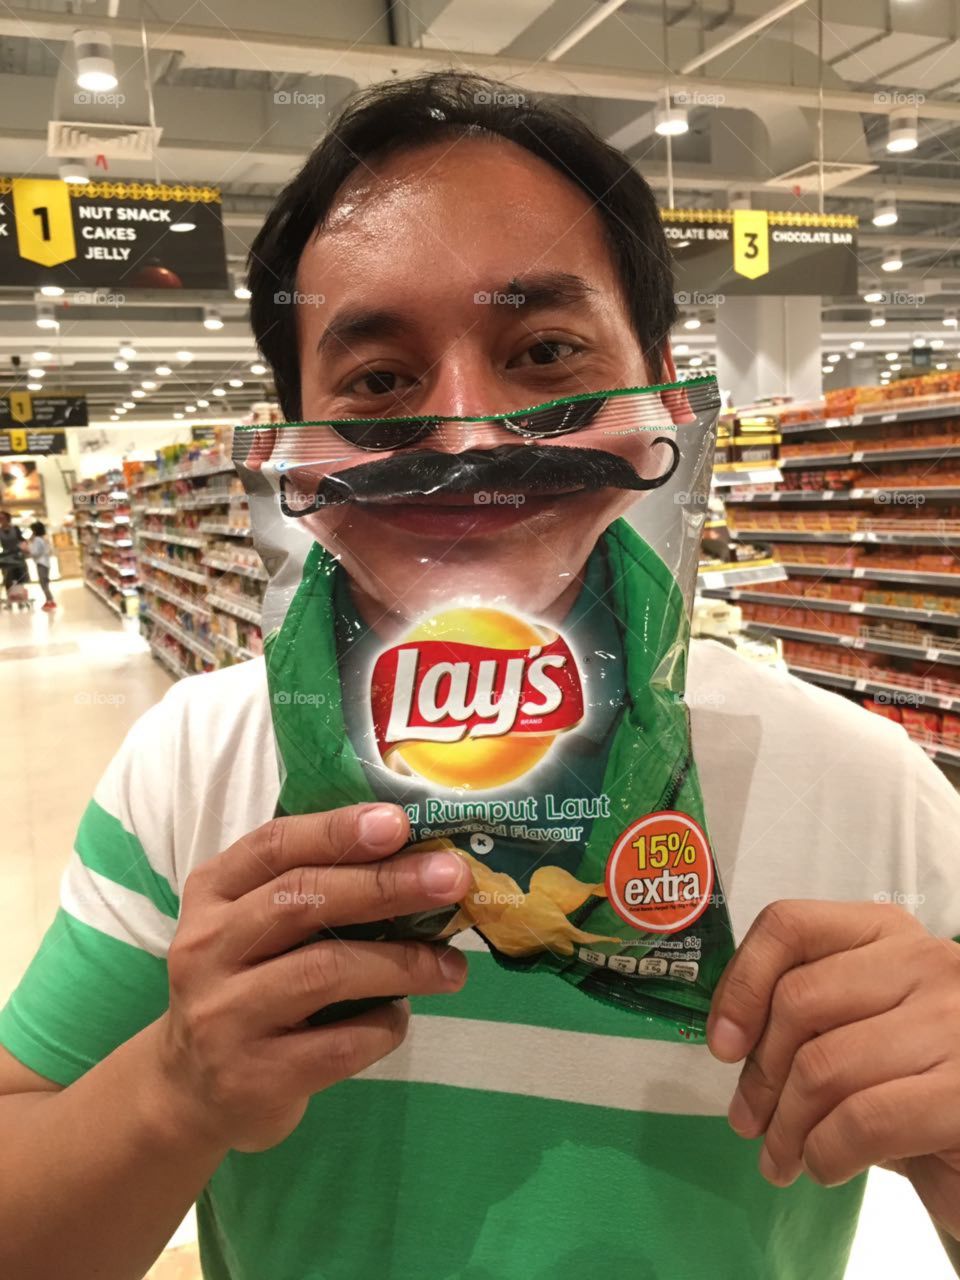 this is my Lays, what's yours?